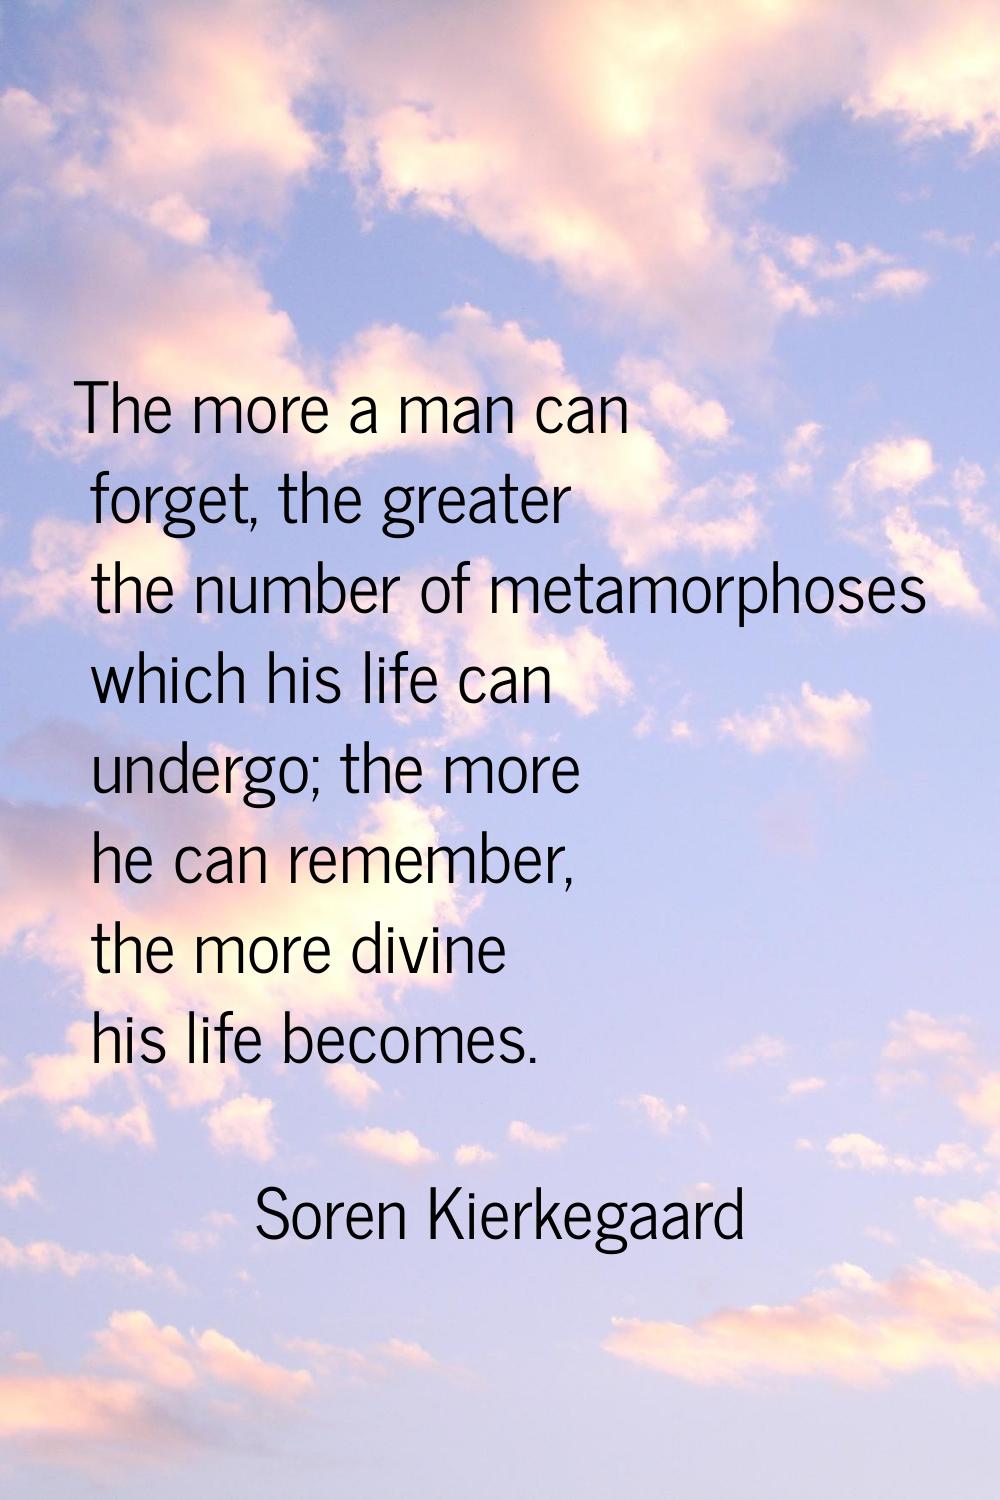 The more a man can forget, the greater the number of metamorphoses which his life can undergo; the 